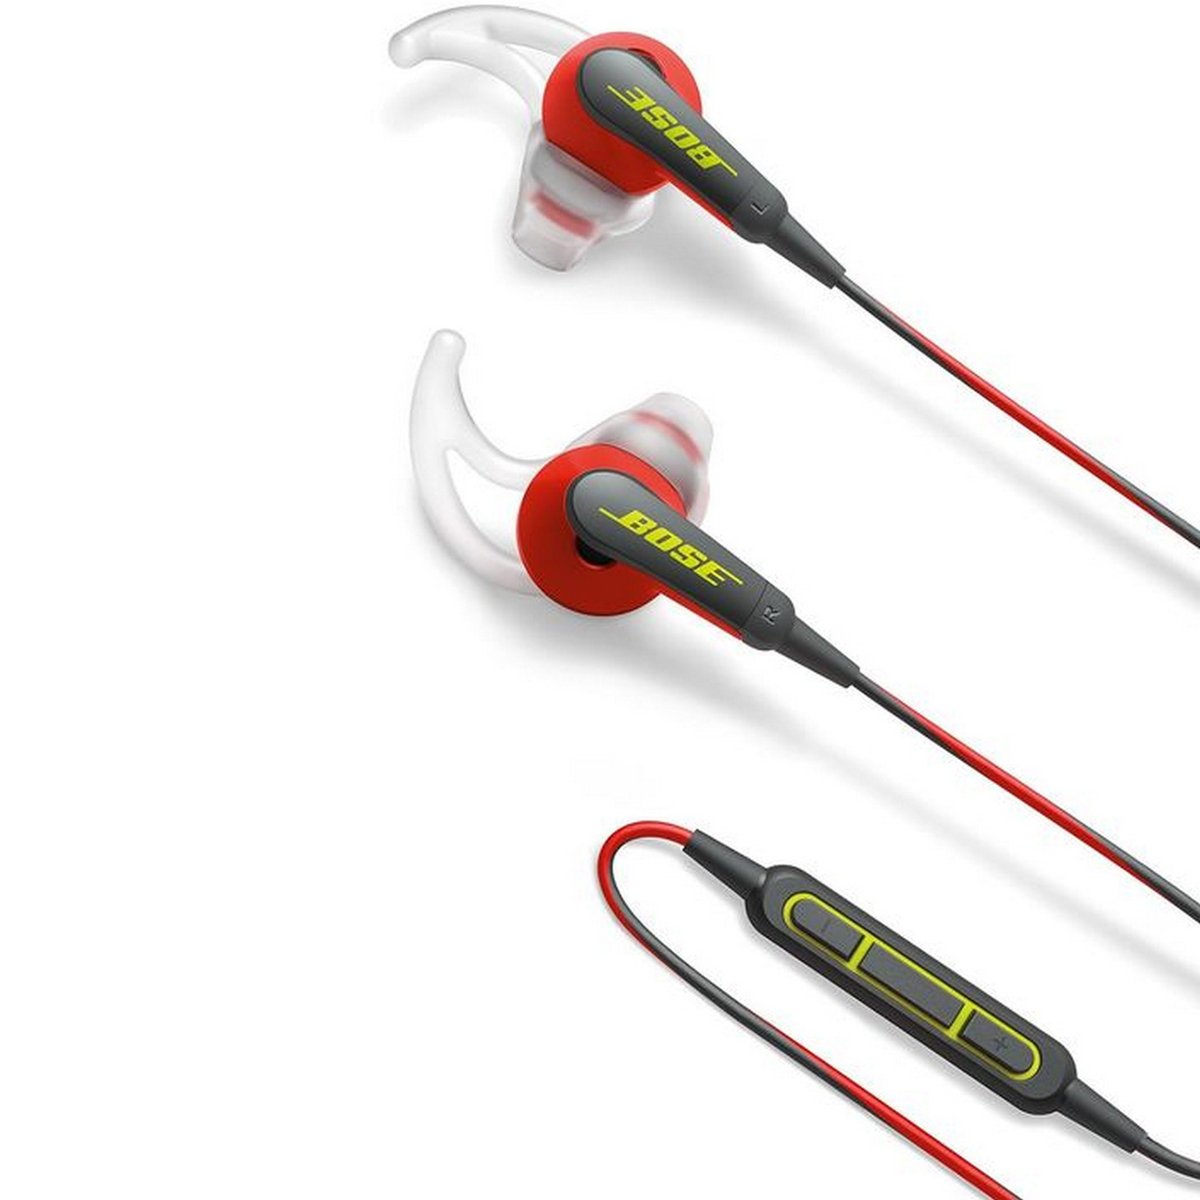 Bose Sound Sport Ear Phone 741776-0040 Power Red